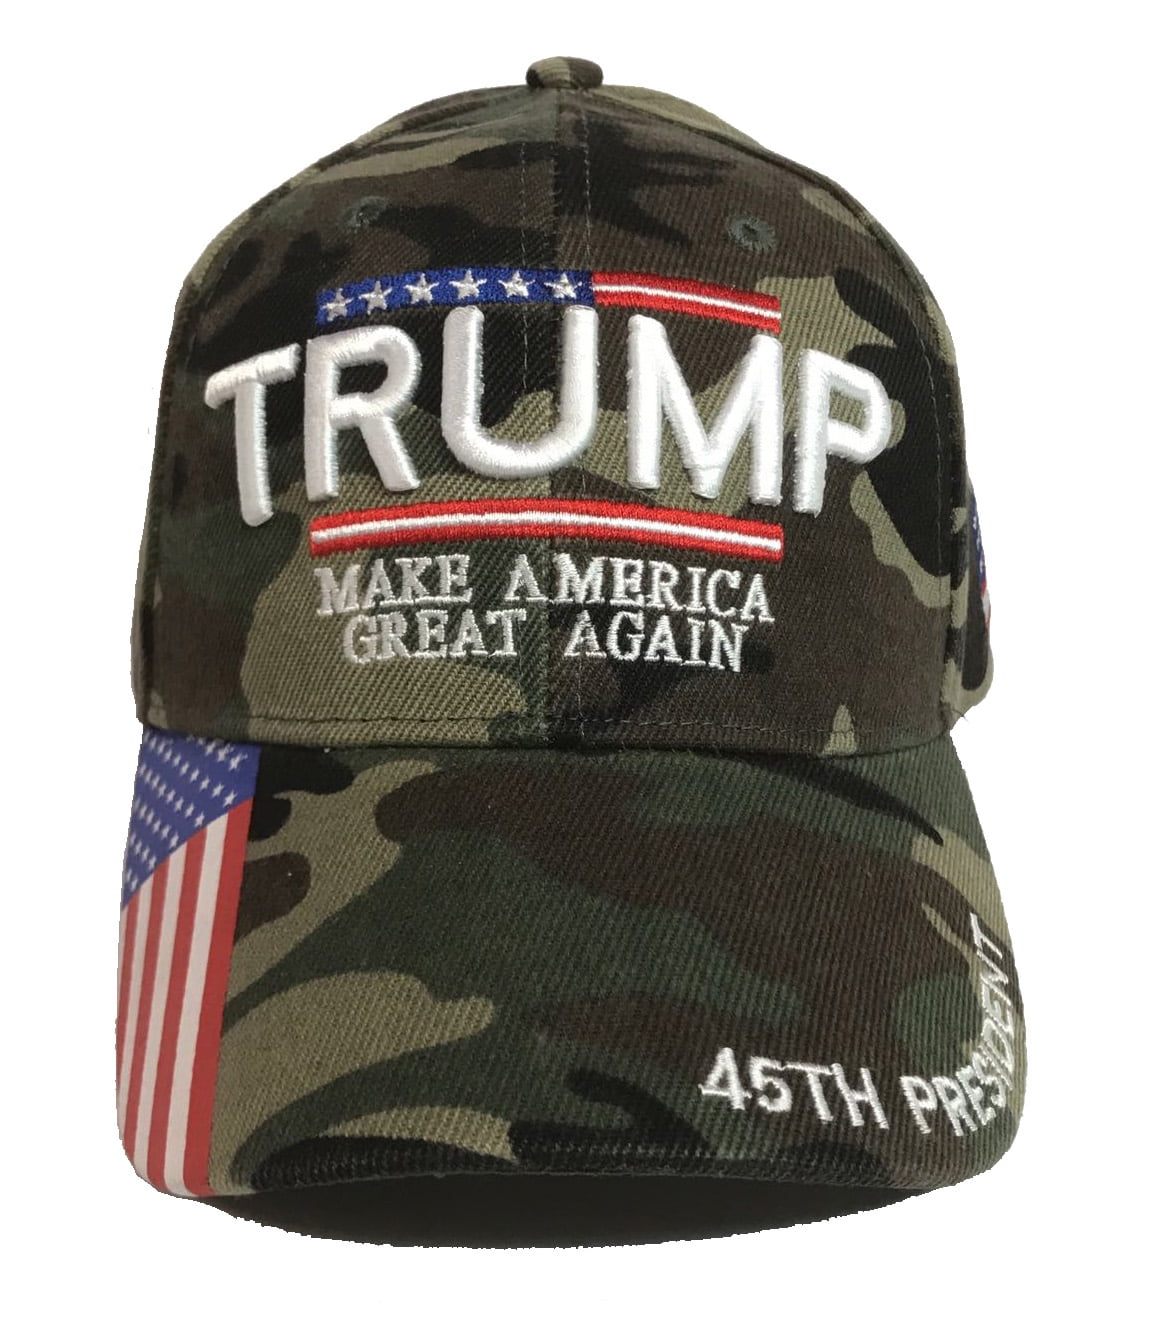 New USA 45 Flag President Election Campaign Embroidery Baseball Cap Hat 3 Colors 